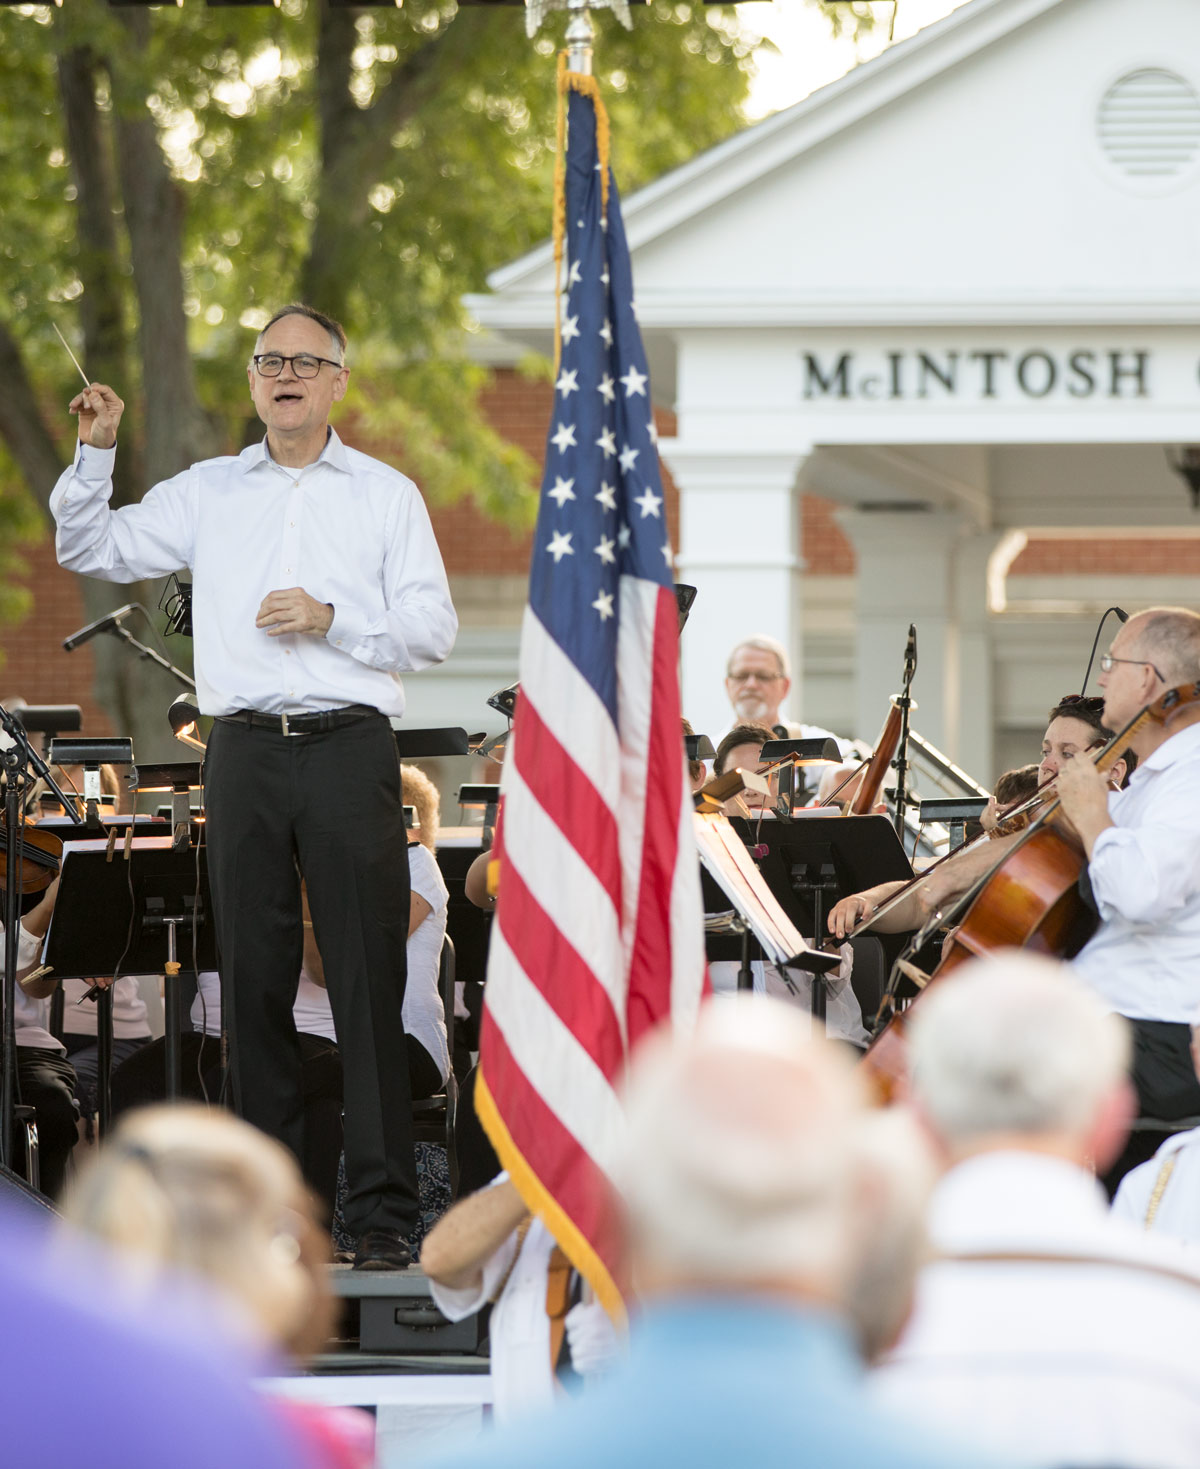 The Lima Symphony Orchestra played a 鈥淧atriotic Pops鈥� concert outside of McIntosh Center on the campus of 葫芦影业. 